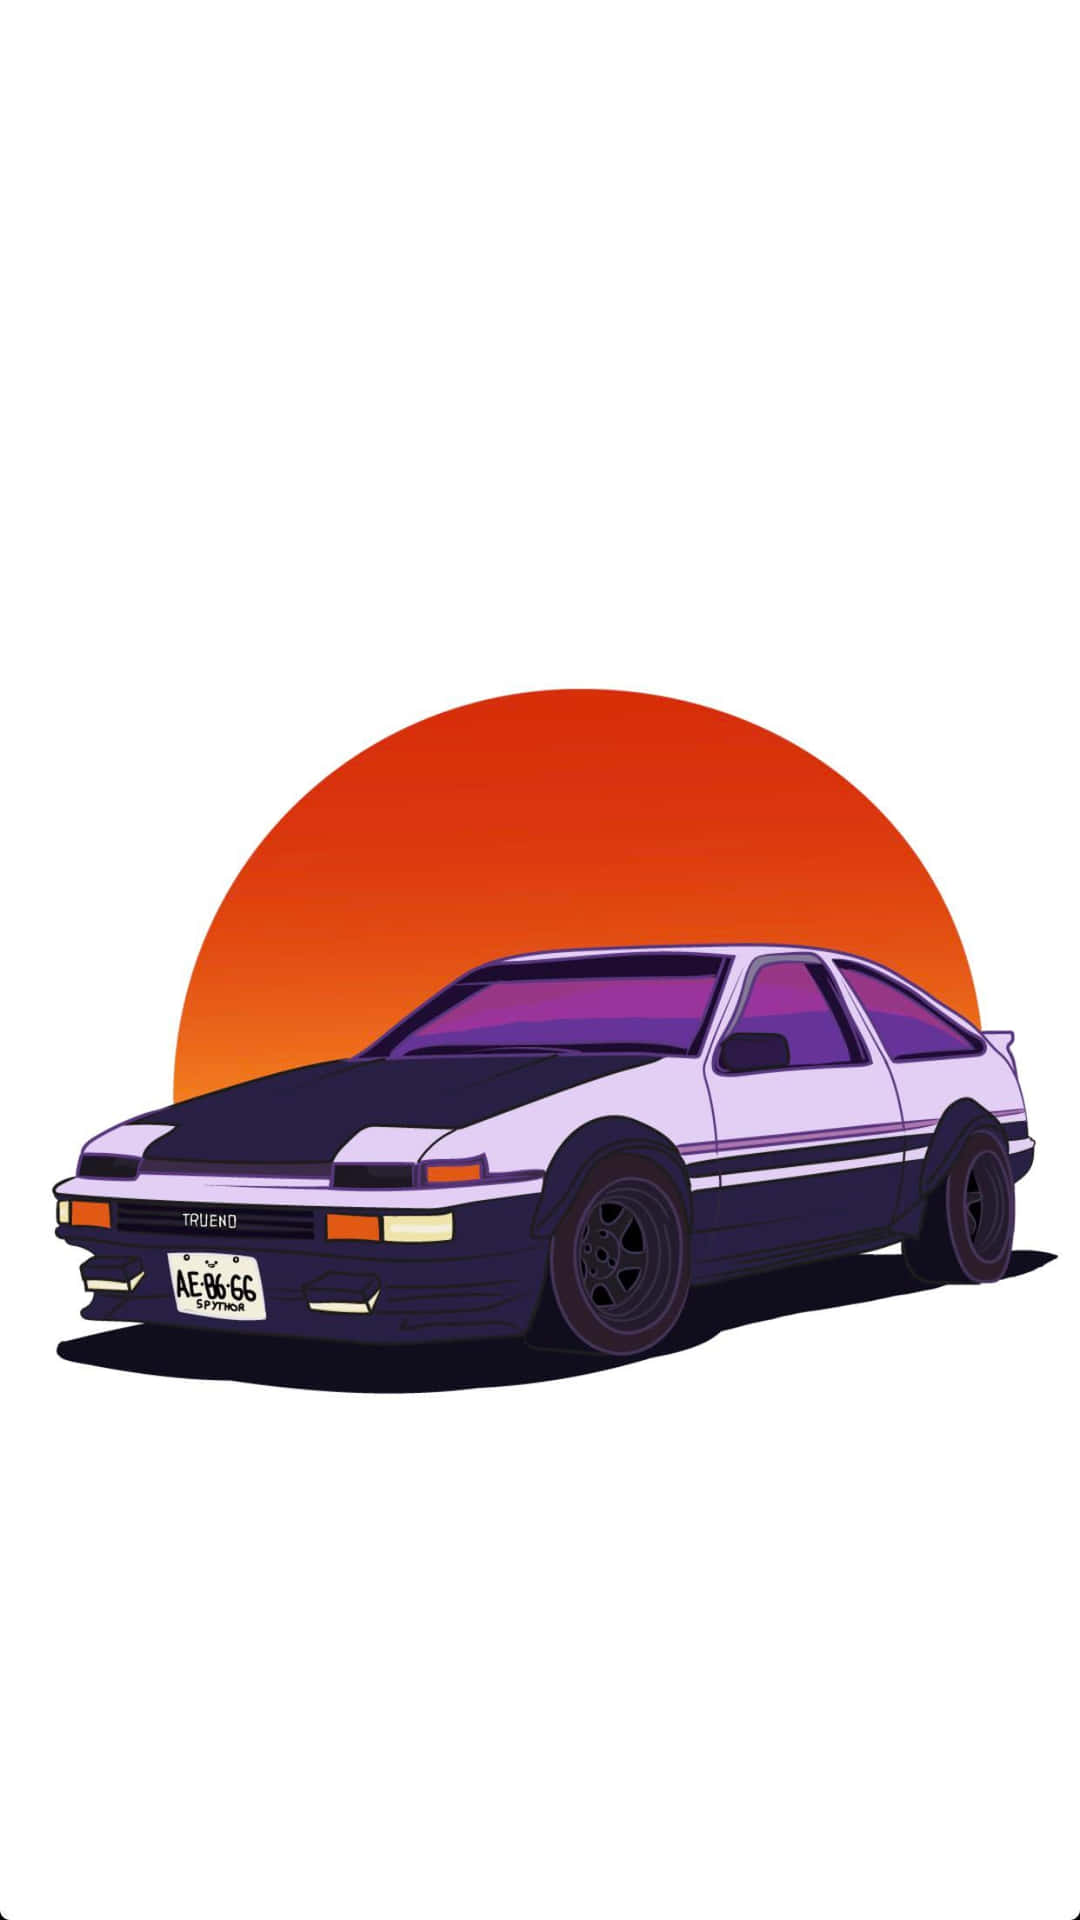 Initial D phone wallpaper, I made it a while ago, I'll make more - Toyota AE86